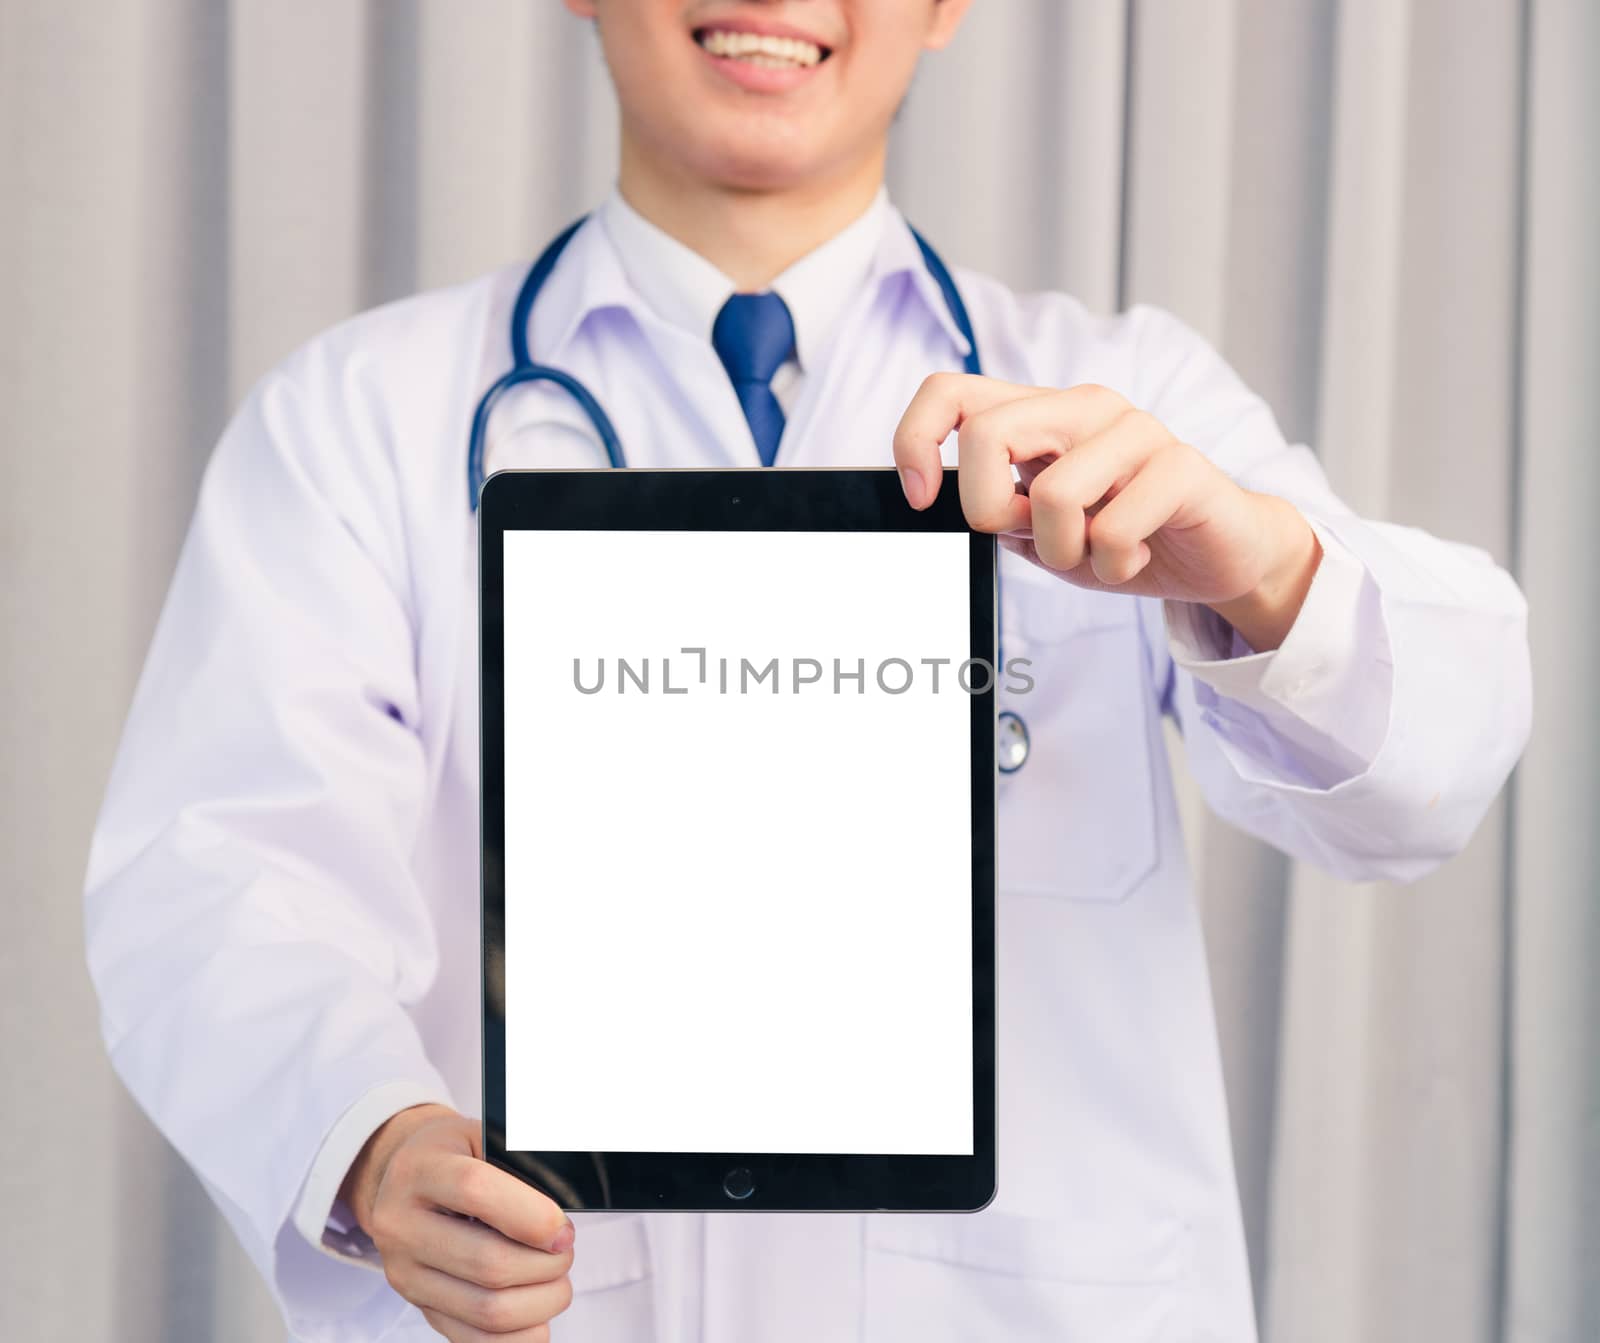 Portrait closeup of Happy Asian young doctor handsome man smiling in uniform and stethoscope neck strap showing front blank screen smart digital tablet on hand, Healthcare medicine concept